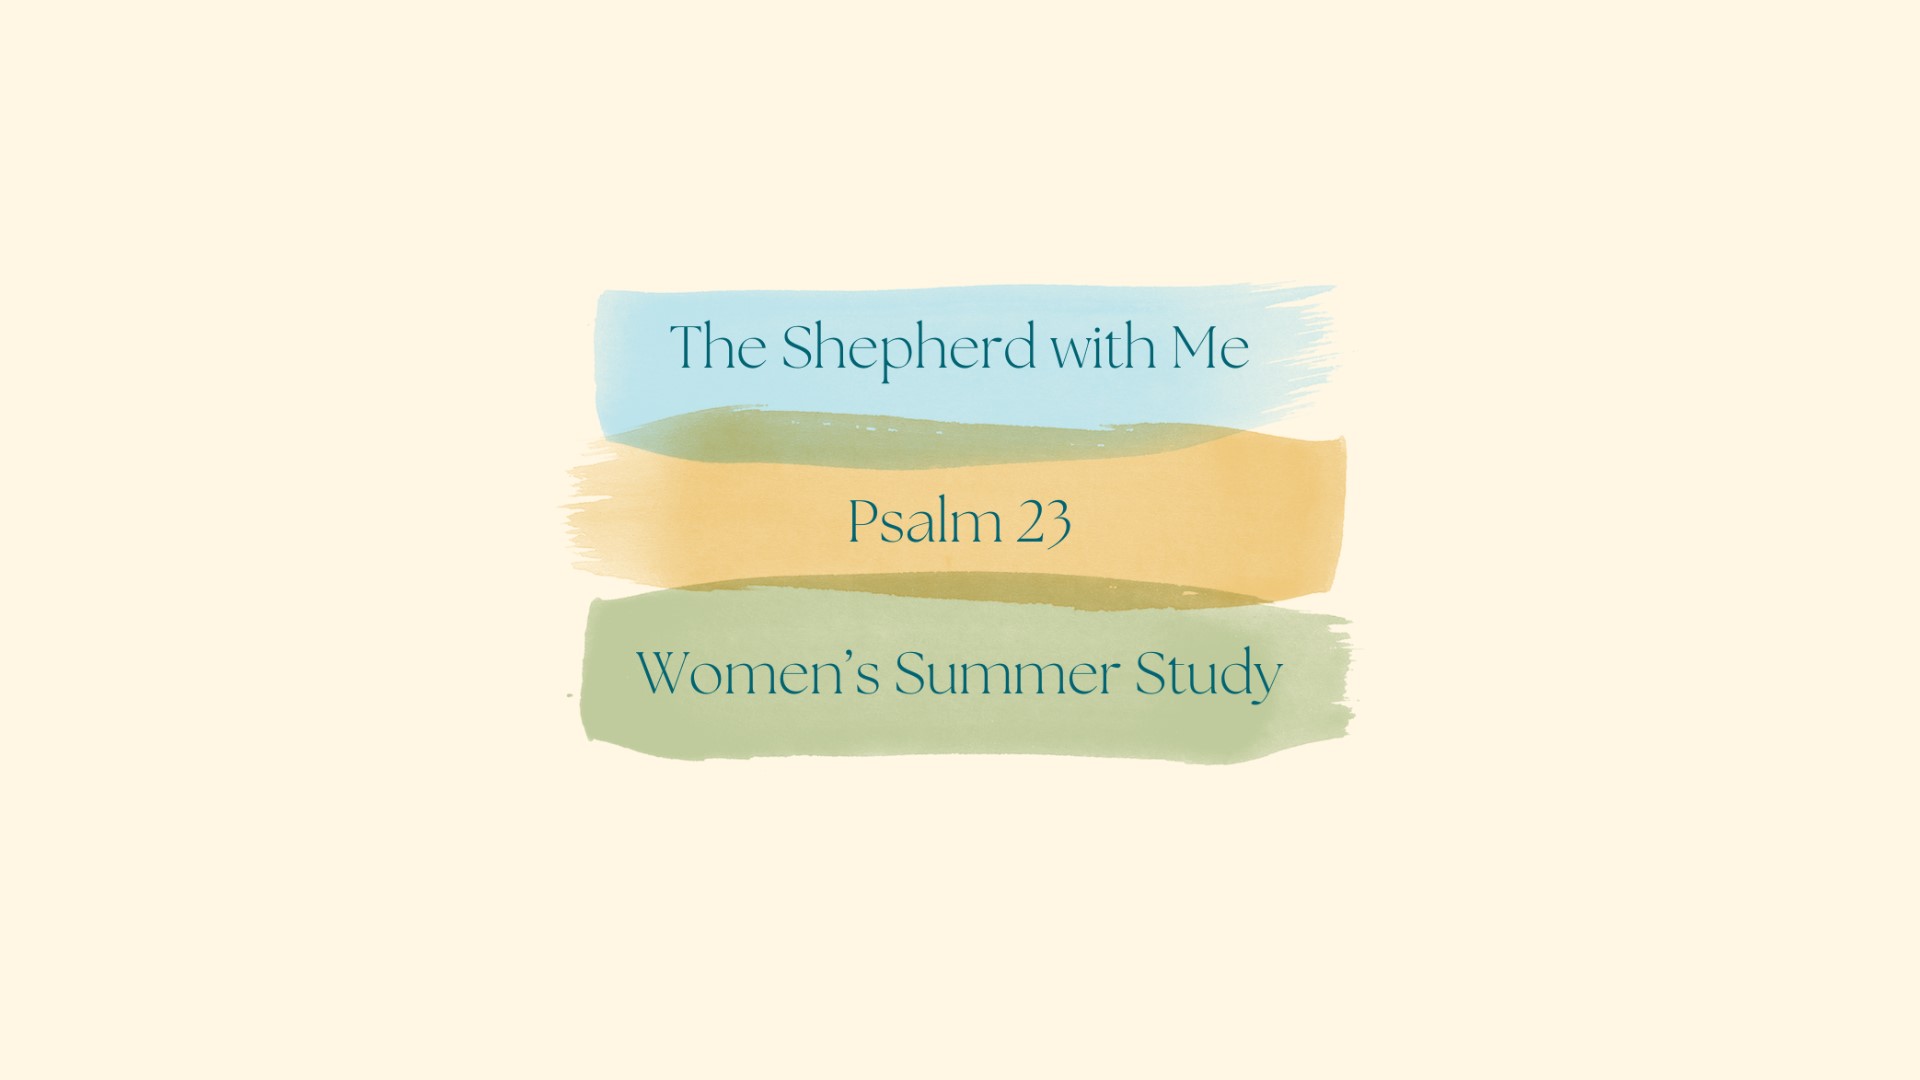 Women’s Summer Study: Psalm 23, The Shepherd with Me – Woodway